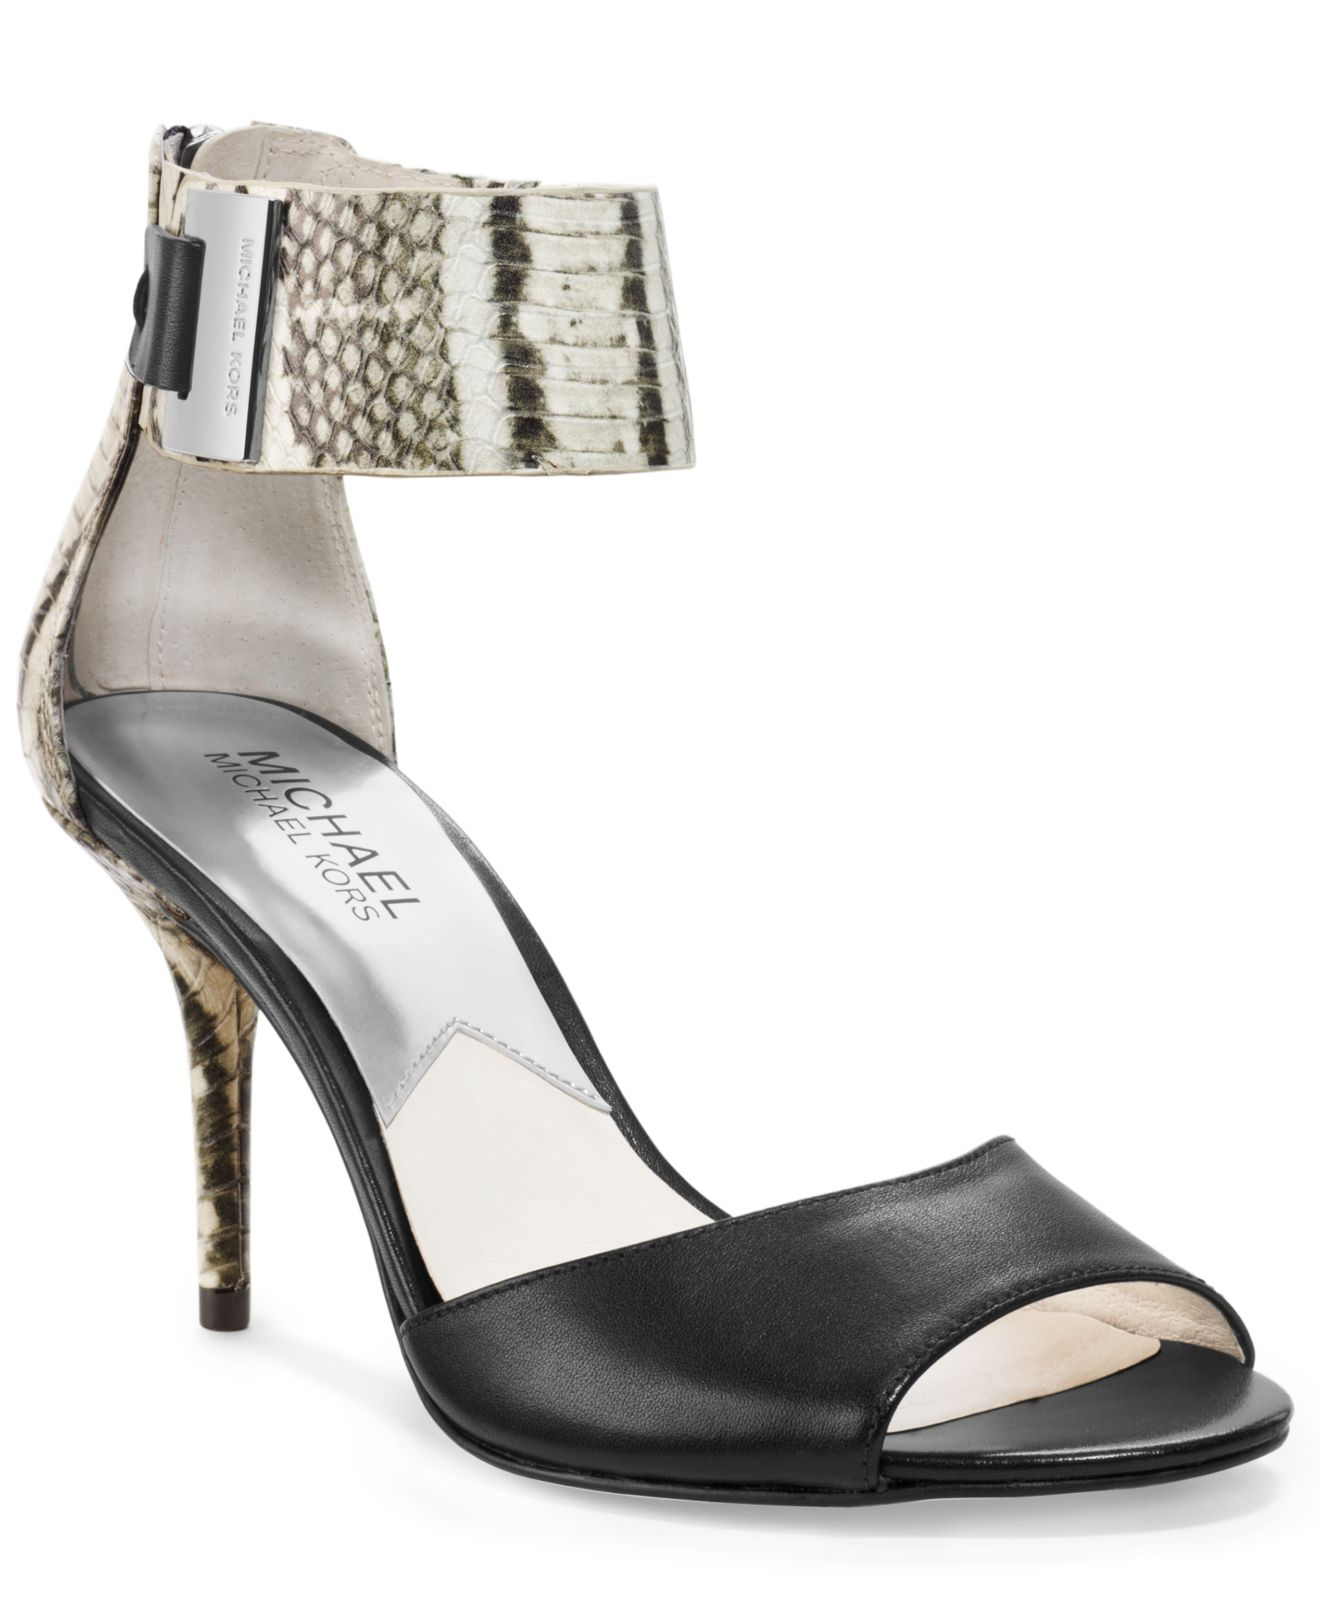 Lyst - Michael Kors Michael Guiliana Ankle Strap Pumps in White